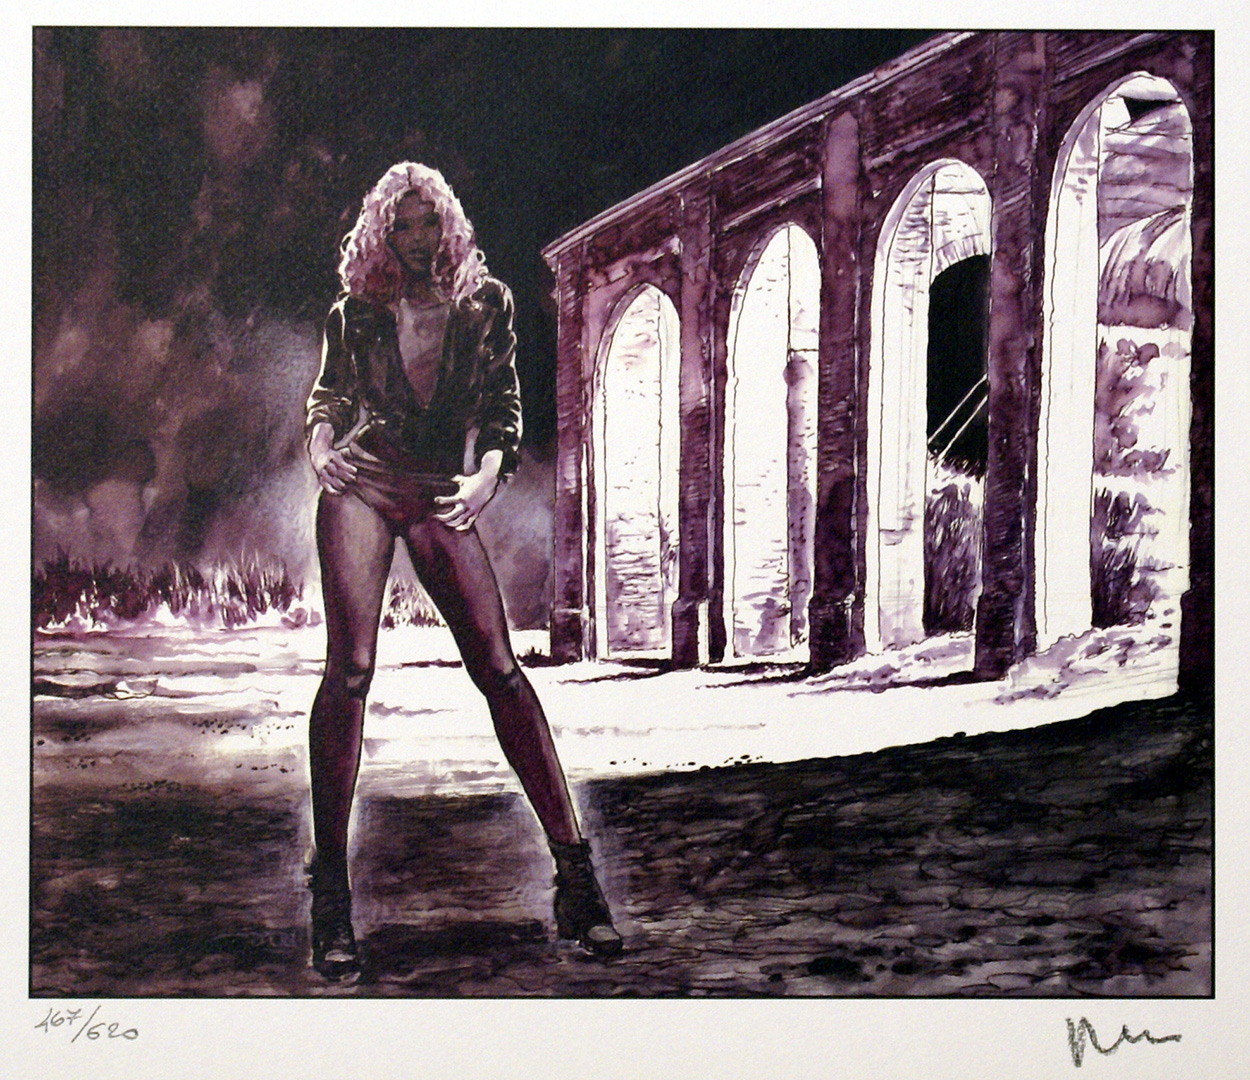 Revoir les toiles 7 (Limited Edition Print) (Signed) art by The Star (Manara) at The Illustration Art Gallery